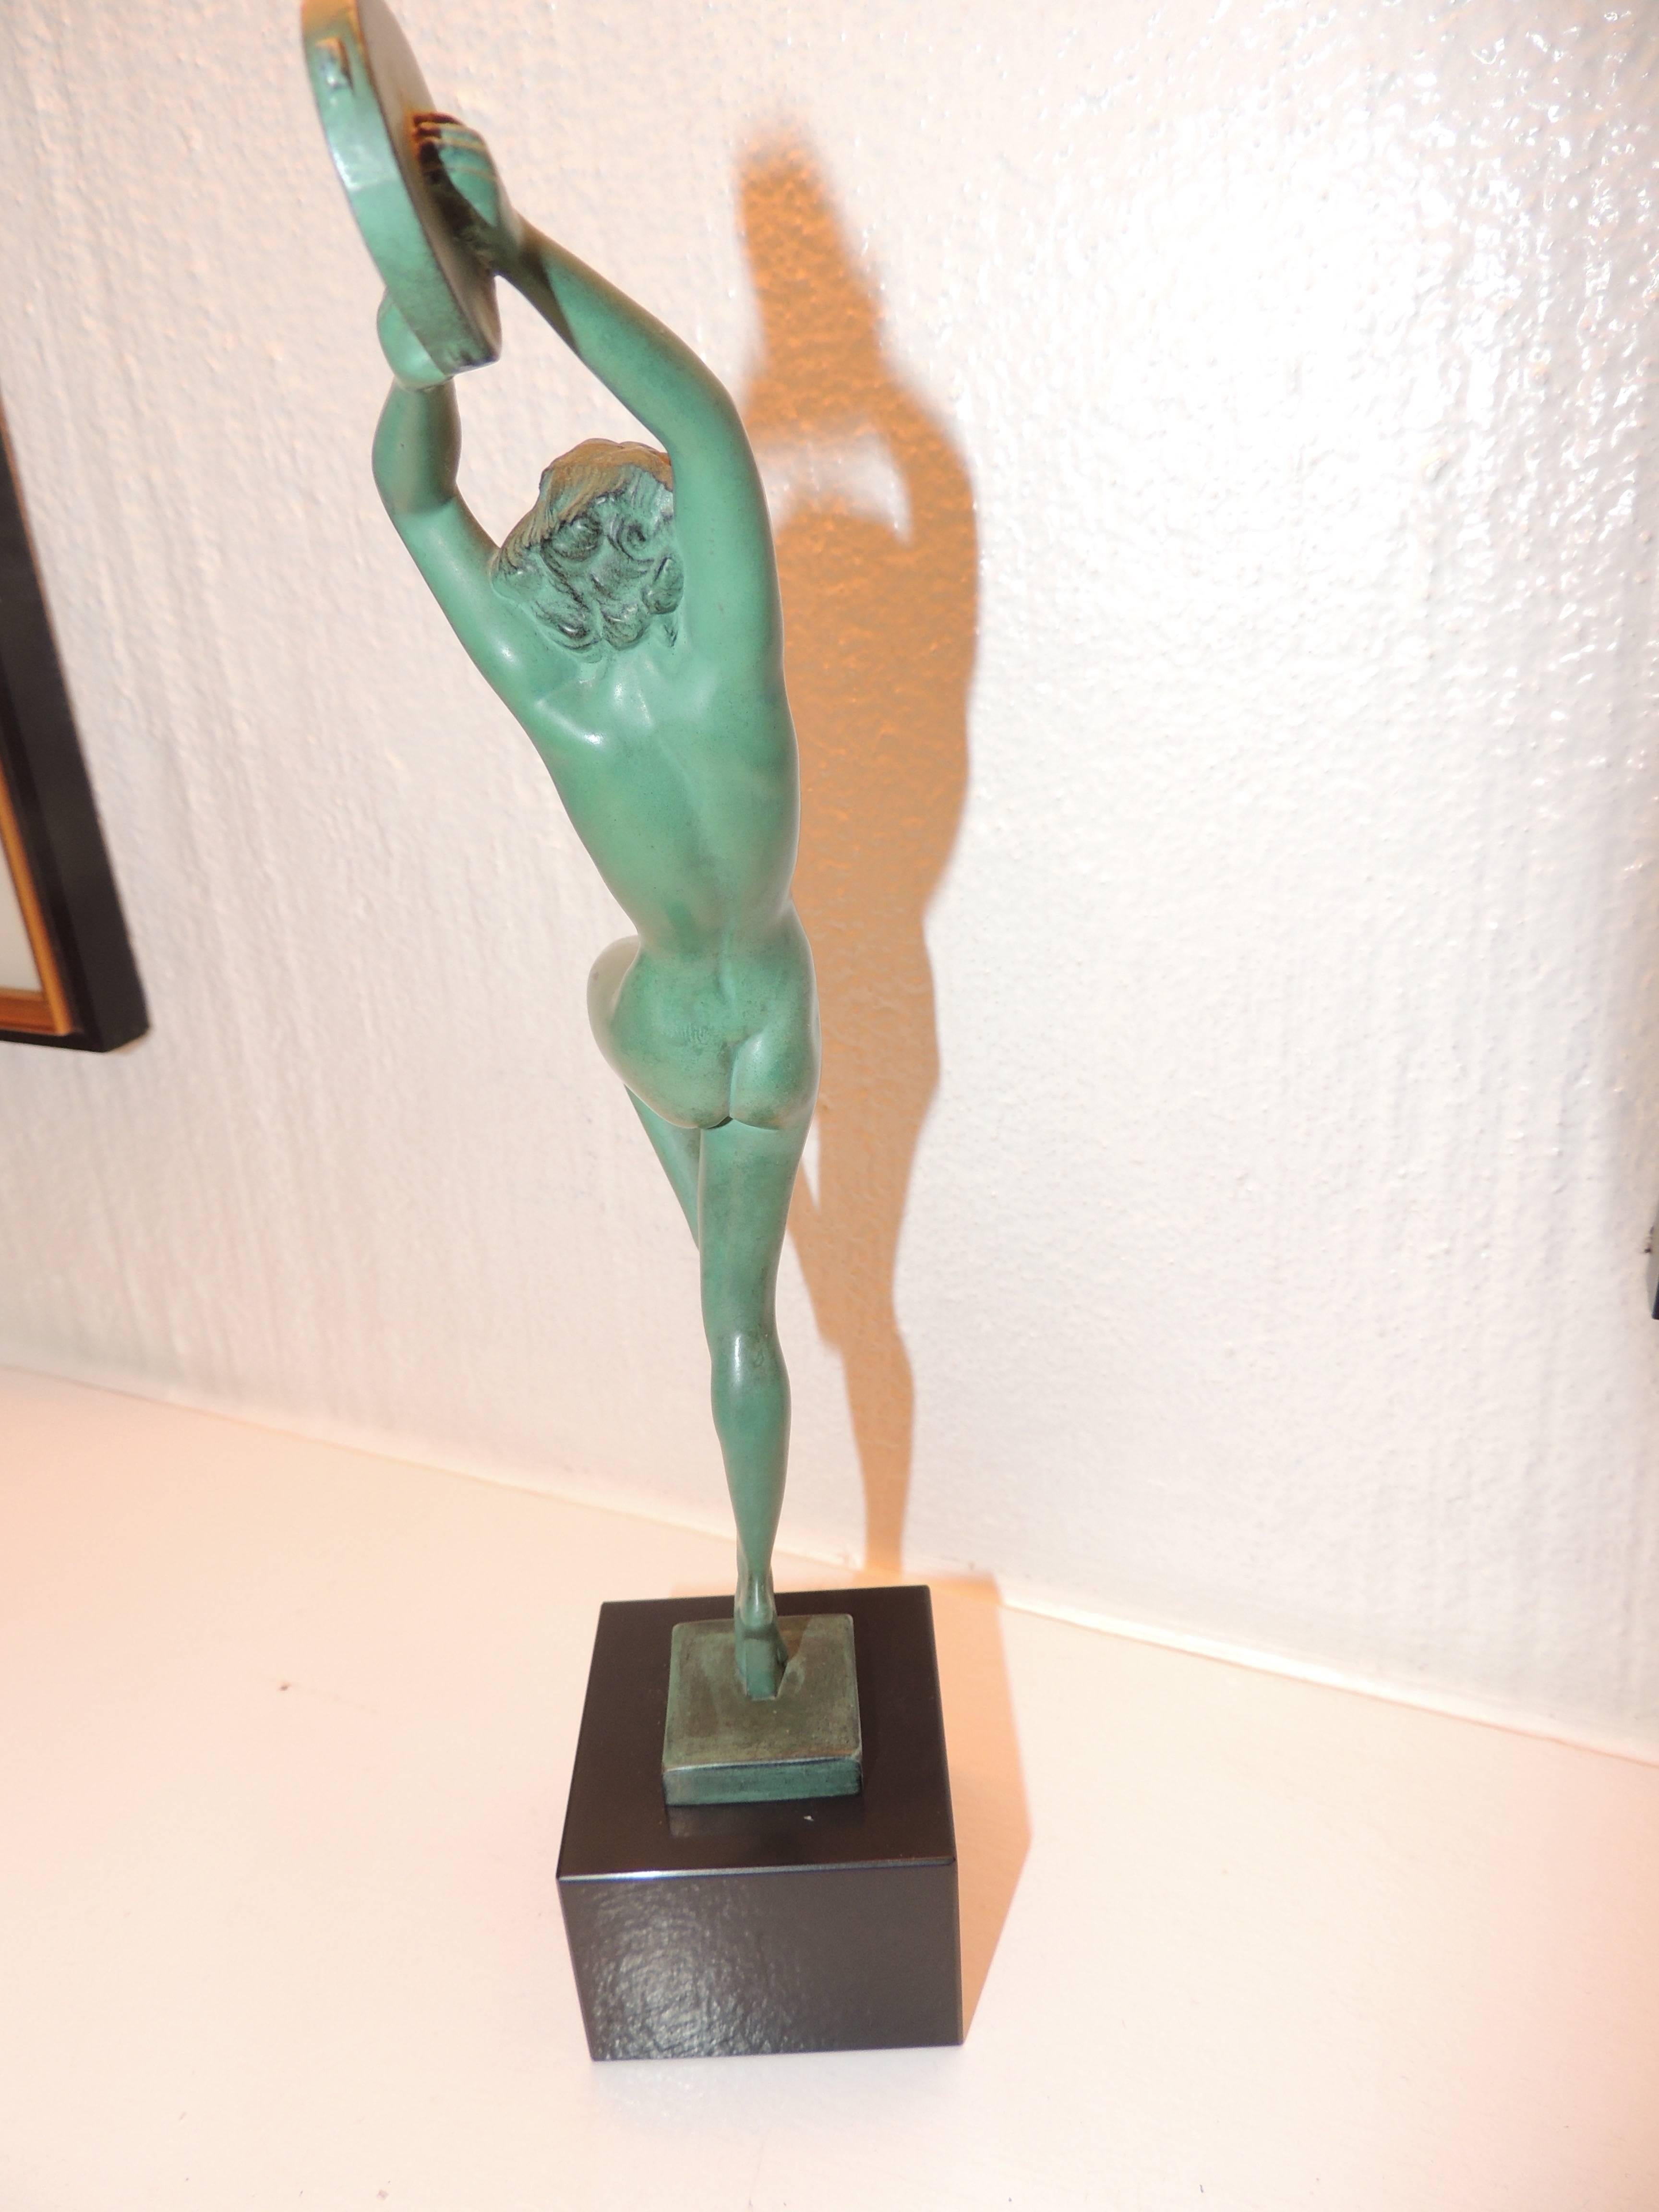 A petite Art Deco sculpture created in the early 1930s, sometimes referred to by the name “Esmeralda”. This piece is both athletic and feminine in its bold pose holding a tambourine high above her head. The finish is patina green, mounted on a